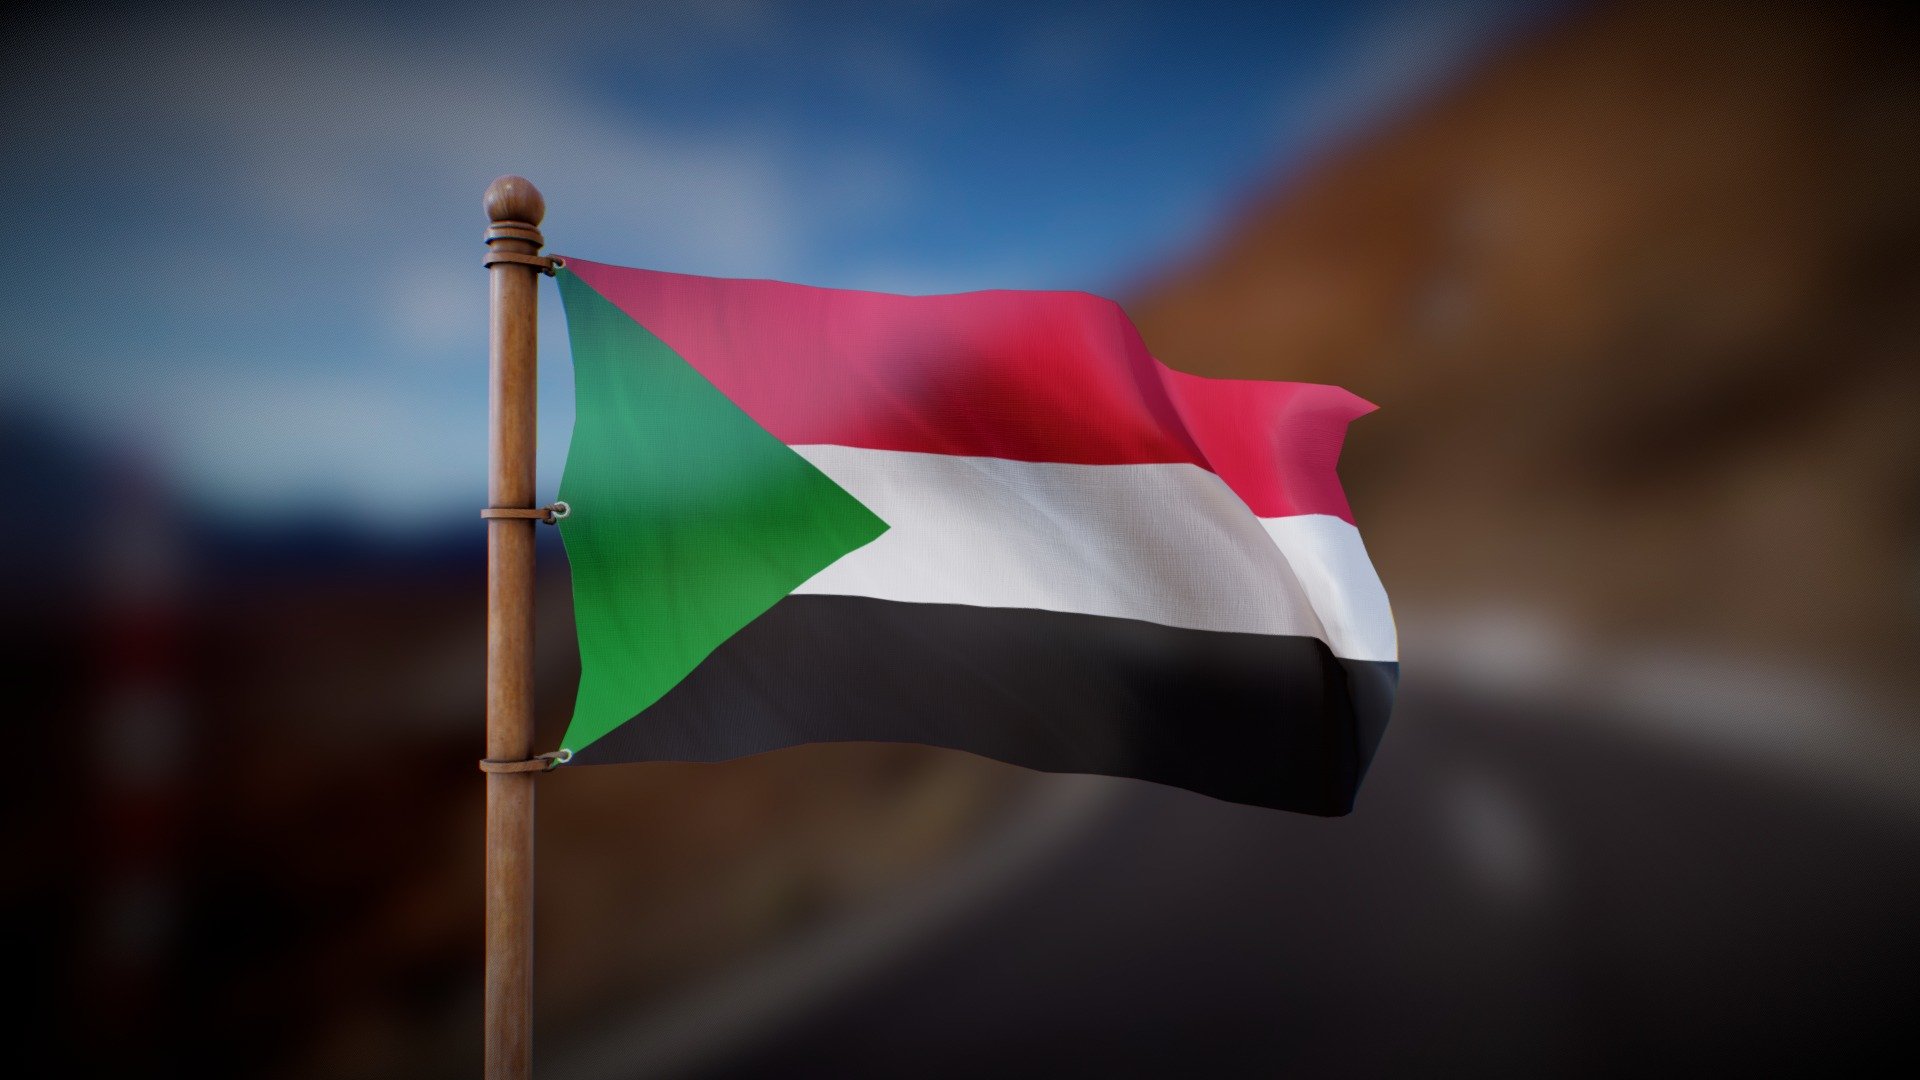 Flag waving in the wind in a looped animation

Joint Animation, perfect for any purpose
4K PBR textures

Feel free to DM me for anu question of custom requests :) - Flag of Sudan - Wind Animated Loop - Buy Royalty Free 3D model by Deftroy 3d model